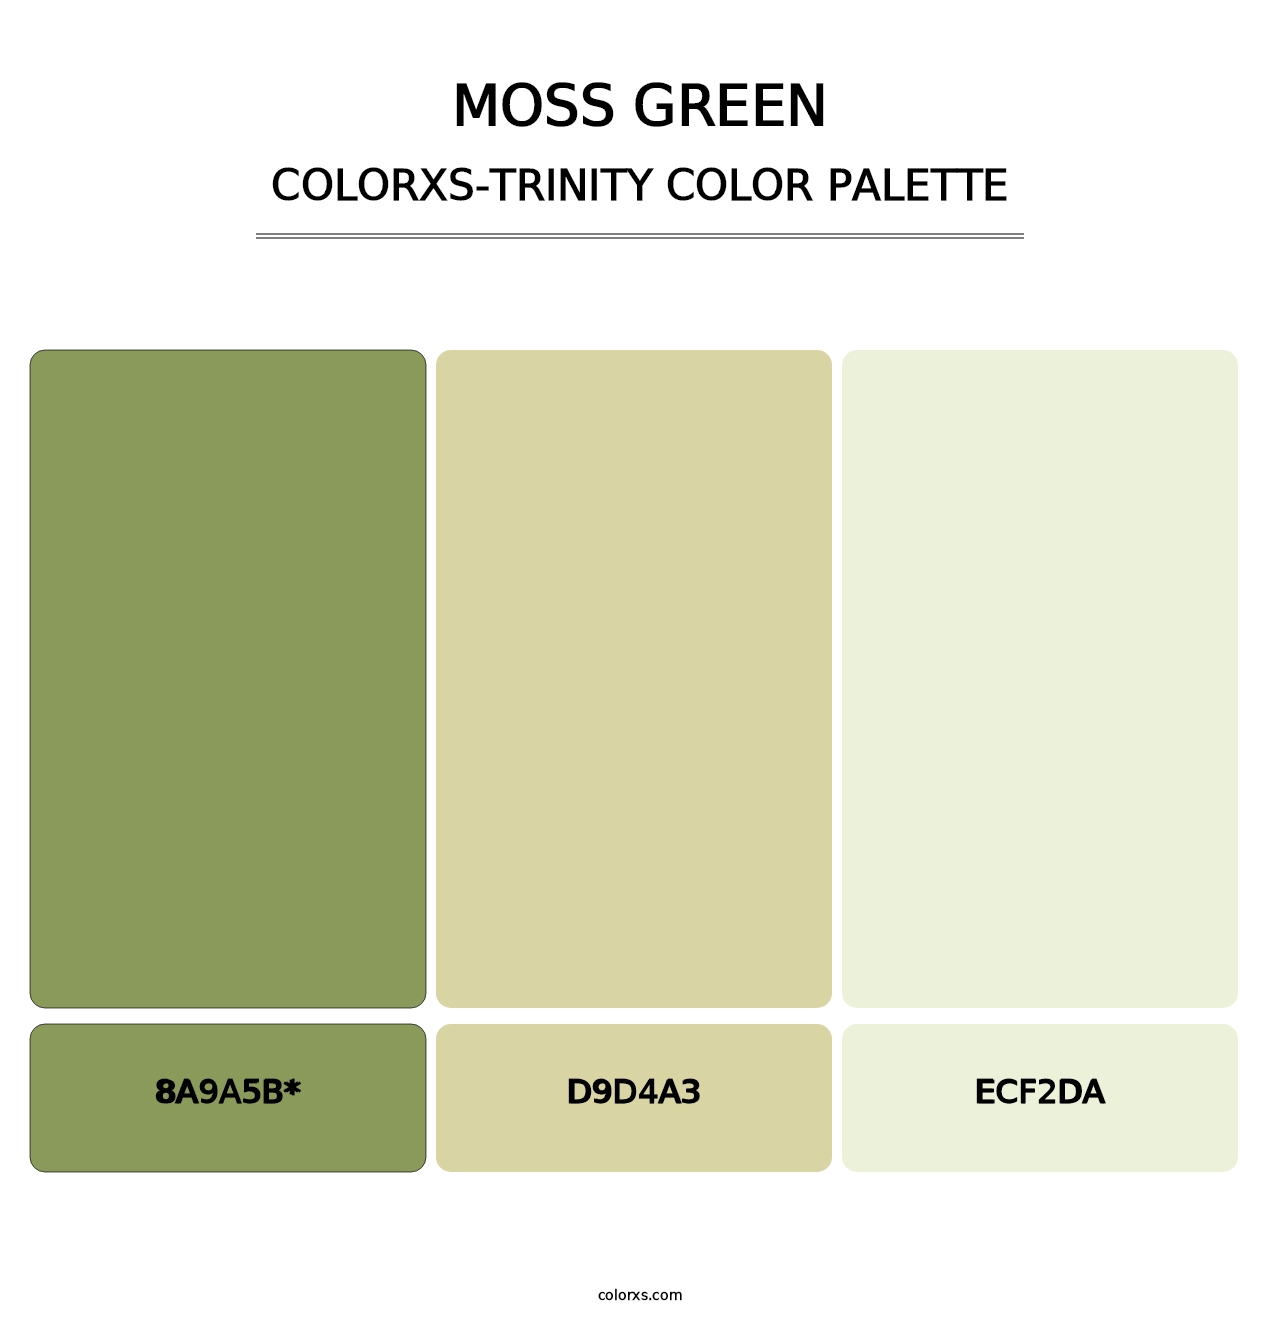 Moss Green - Colorxs Trinity Palette